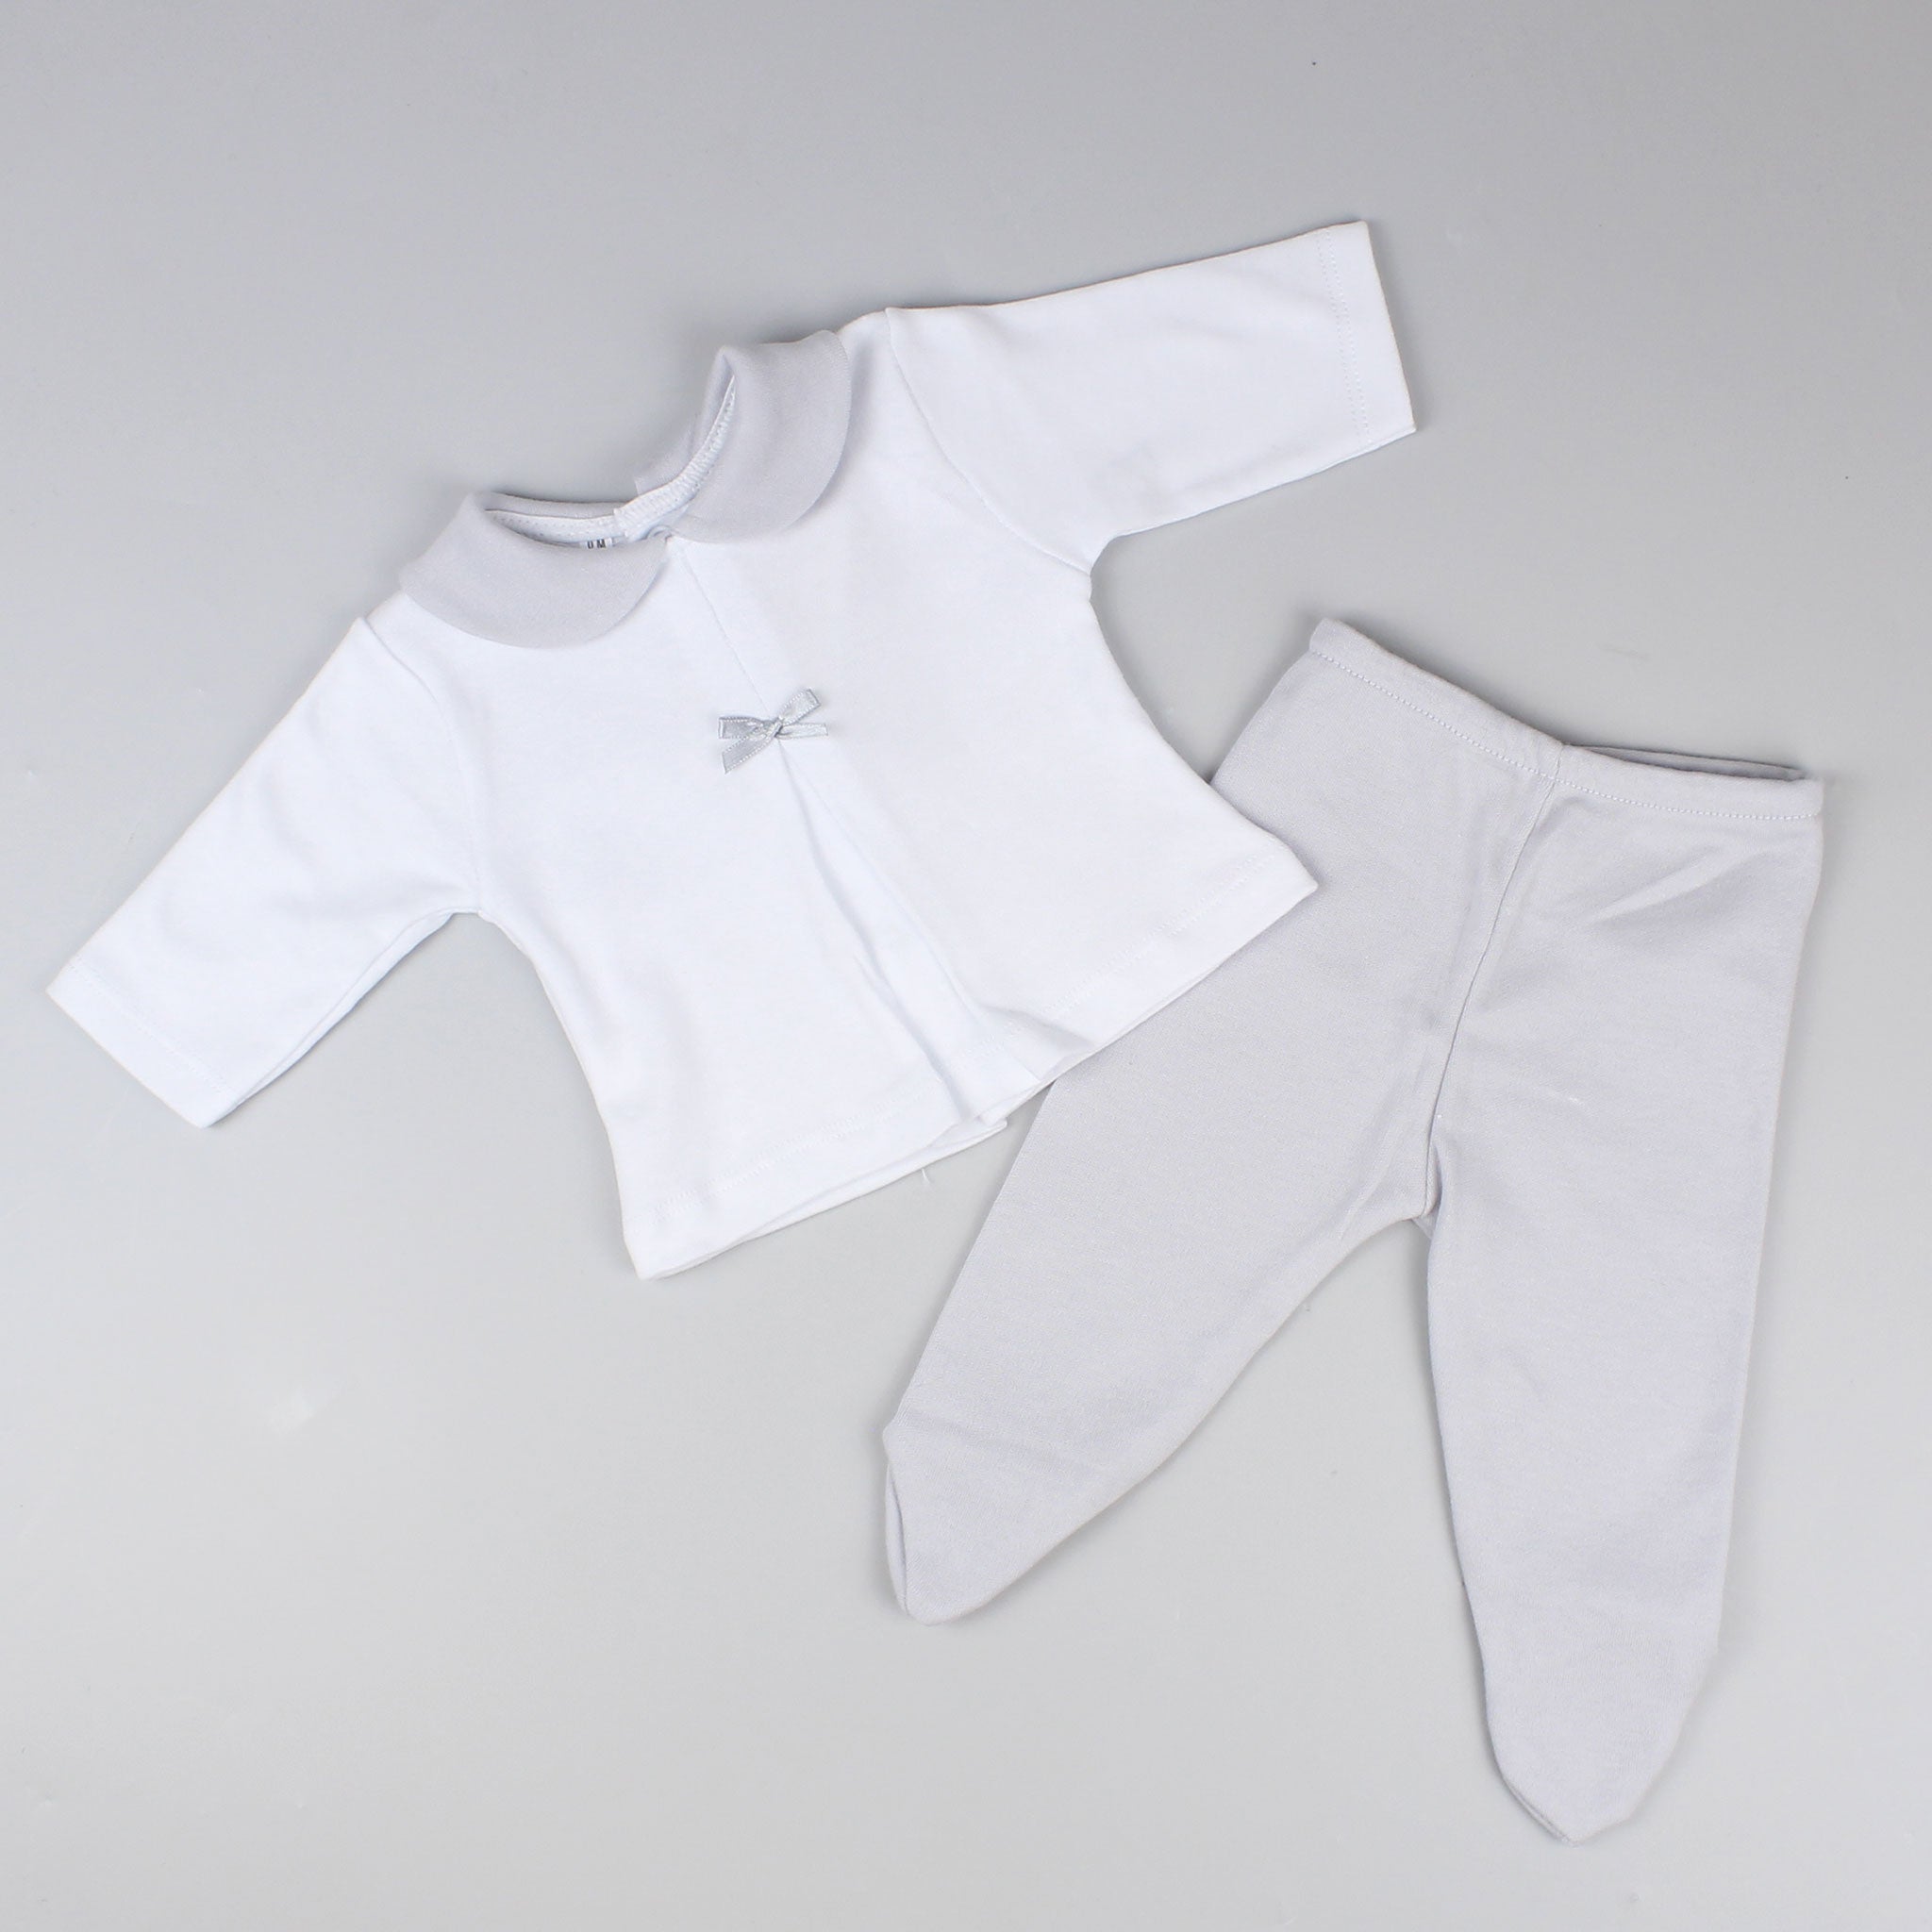 unisex grey affordable baby outfit cotton with feet